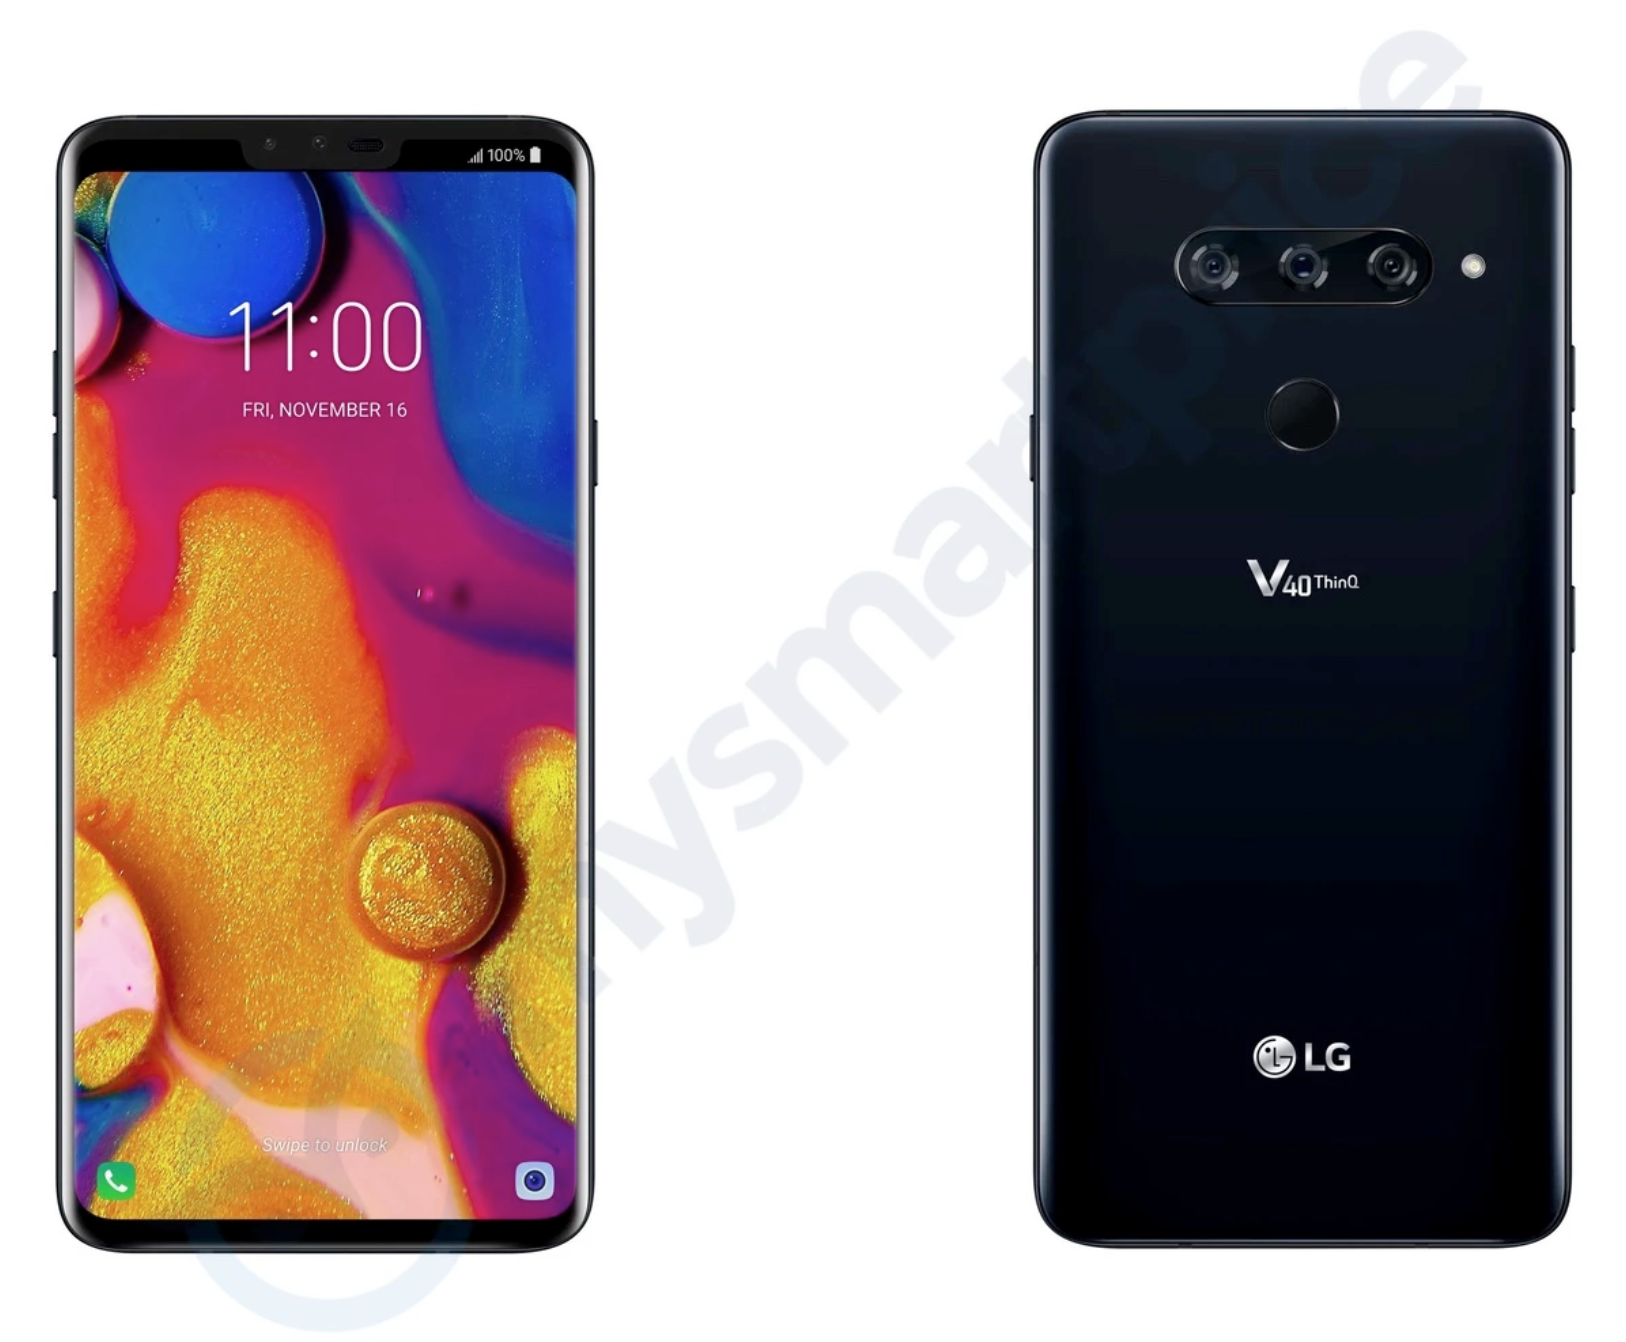 How much will the LG V40 ThinQ cost?